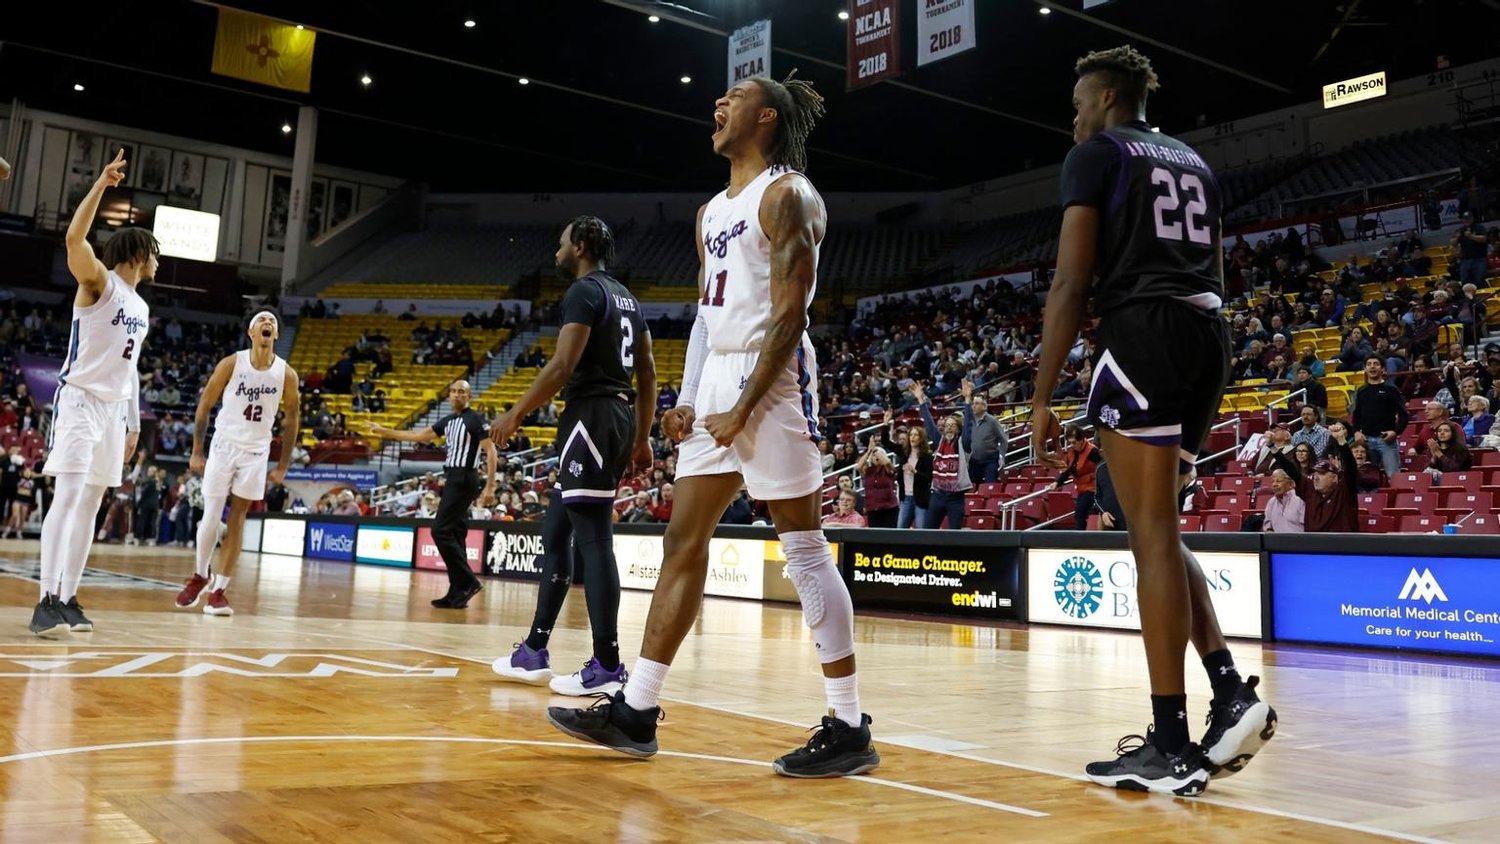 DaJuan Quaye Gordon exults after a slam dunk Feb. 1 as the Aggies earned their first Western Athletic Conference game of the season, defeating Stephen F. Austin 73-67 in the Pan Am Center. They will host Seattle 7 p.m. Saturday, Feb. 4, preceded by the Aggie women playing Grand Canyon in a 4 p.m. game.